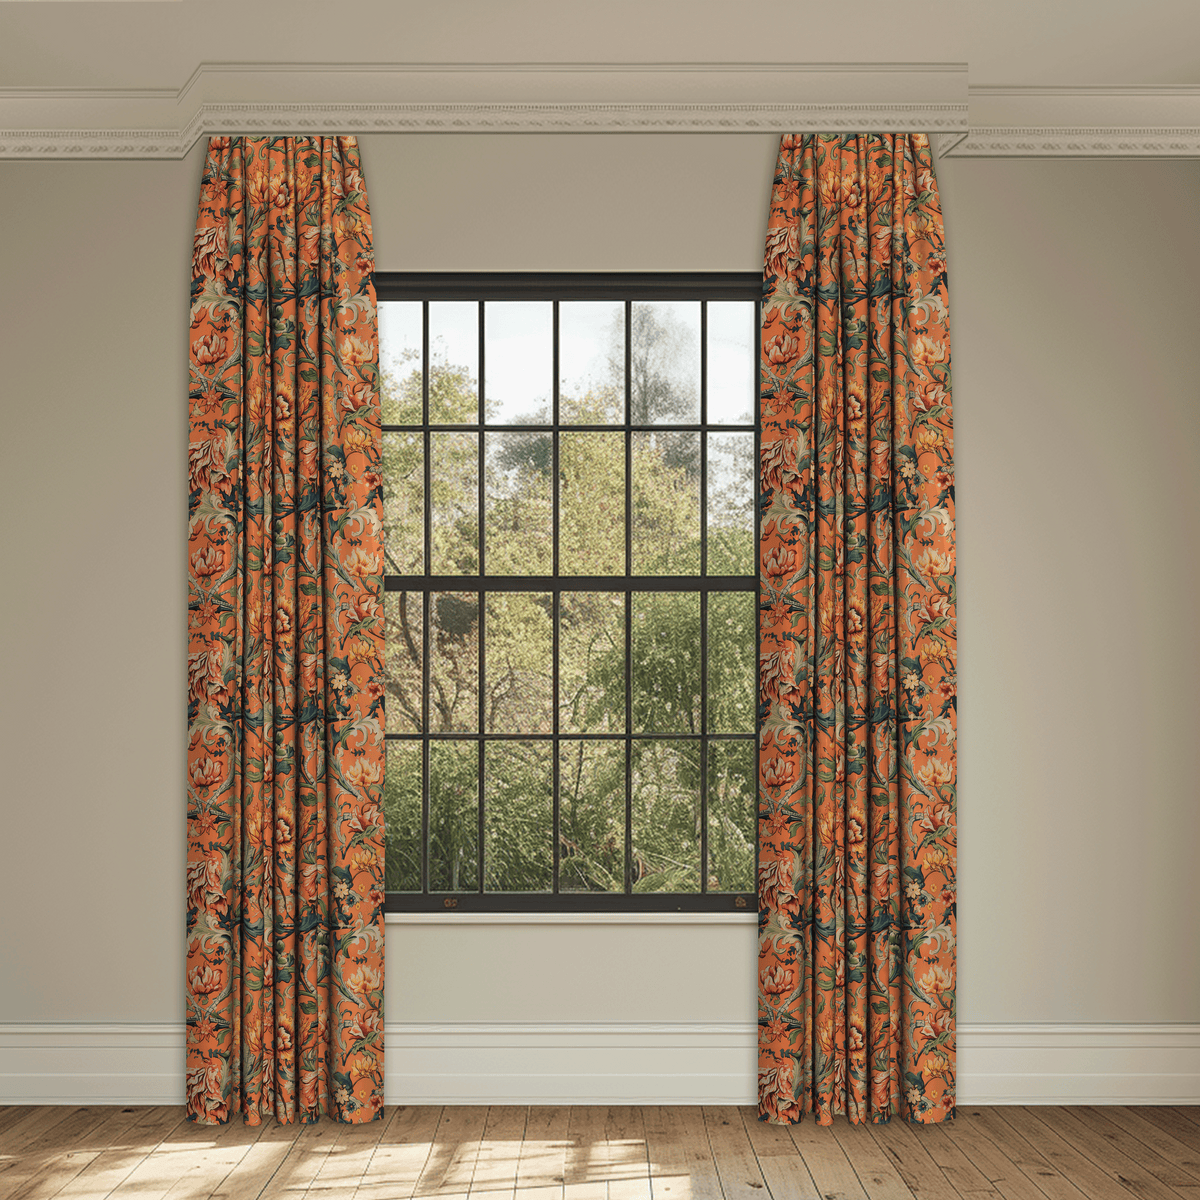 Constant Joy Tangerine Made to Measure Curtains